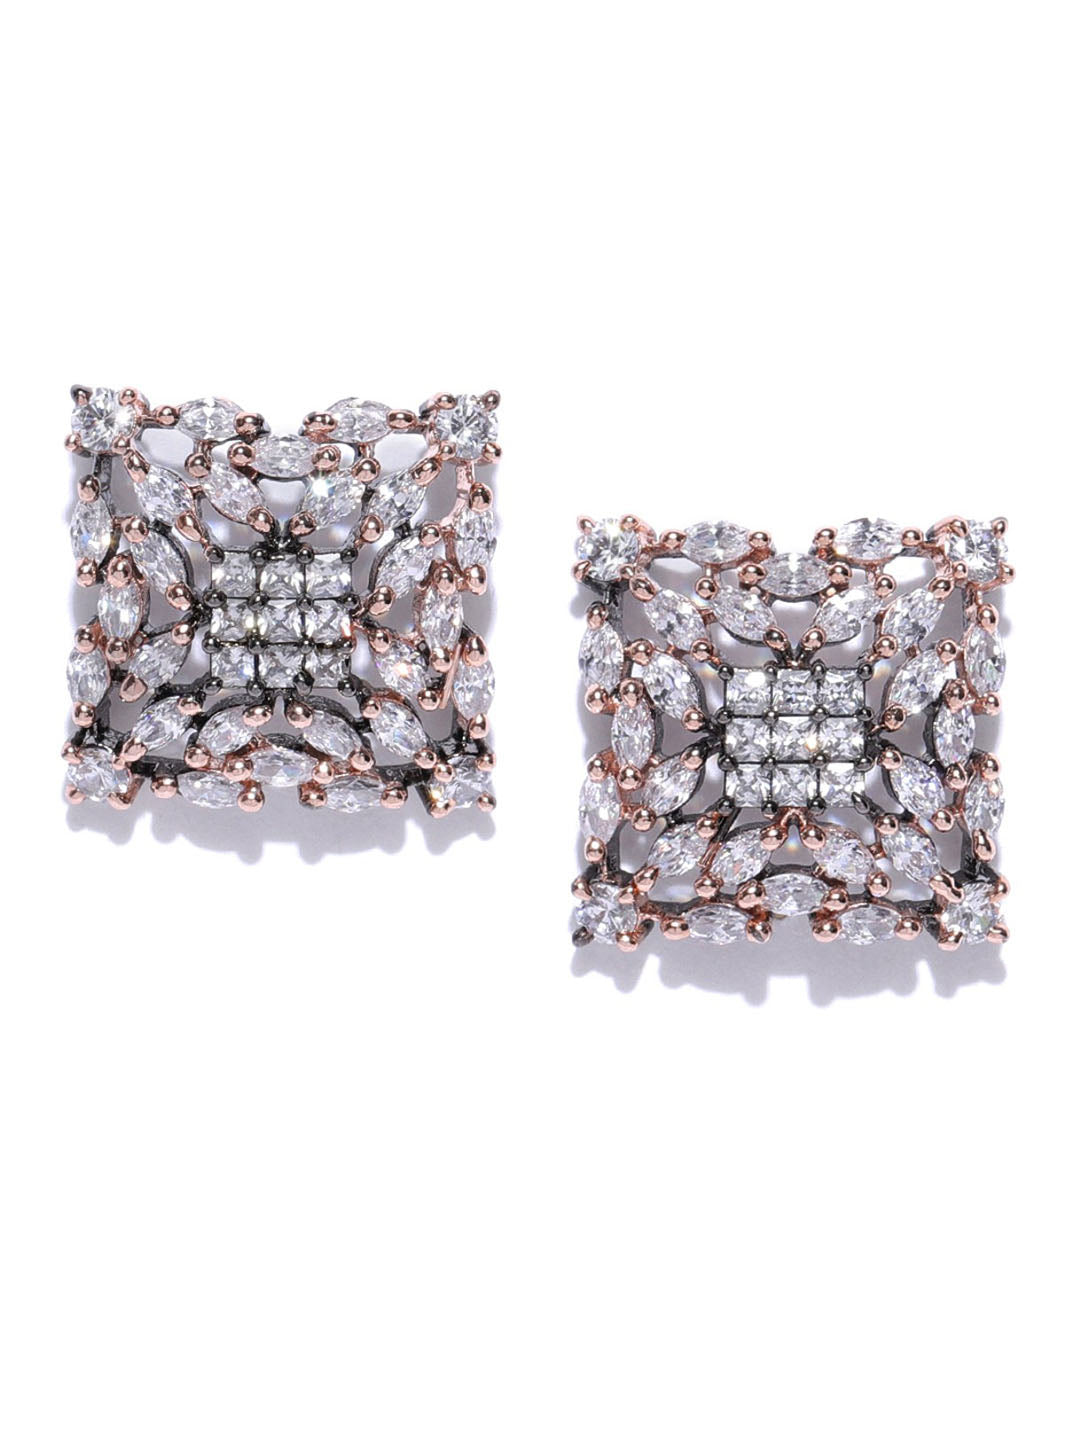 Sparkling Rose Gold Plated Geometric Shaped American Diamond Stud Earring For Women And Girls